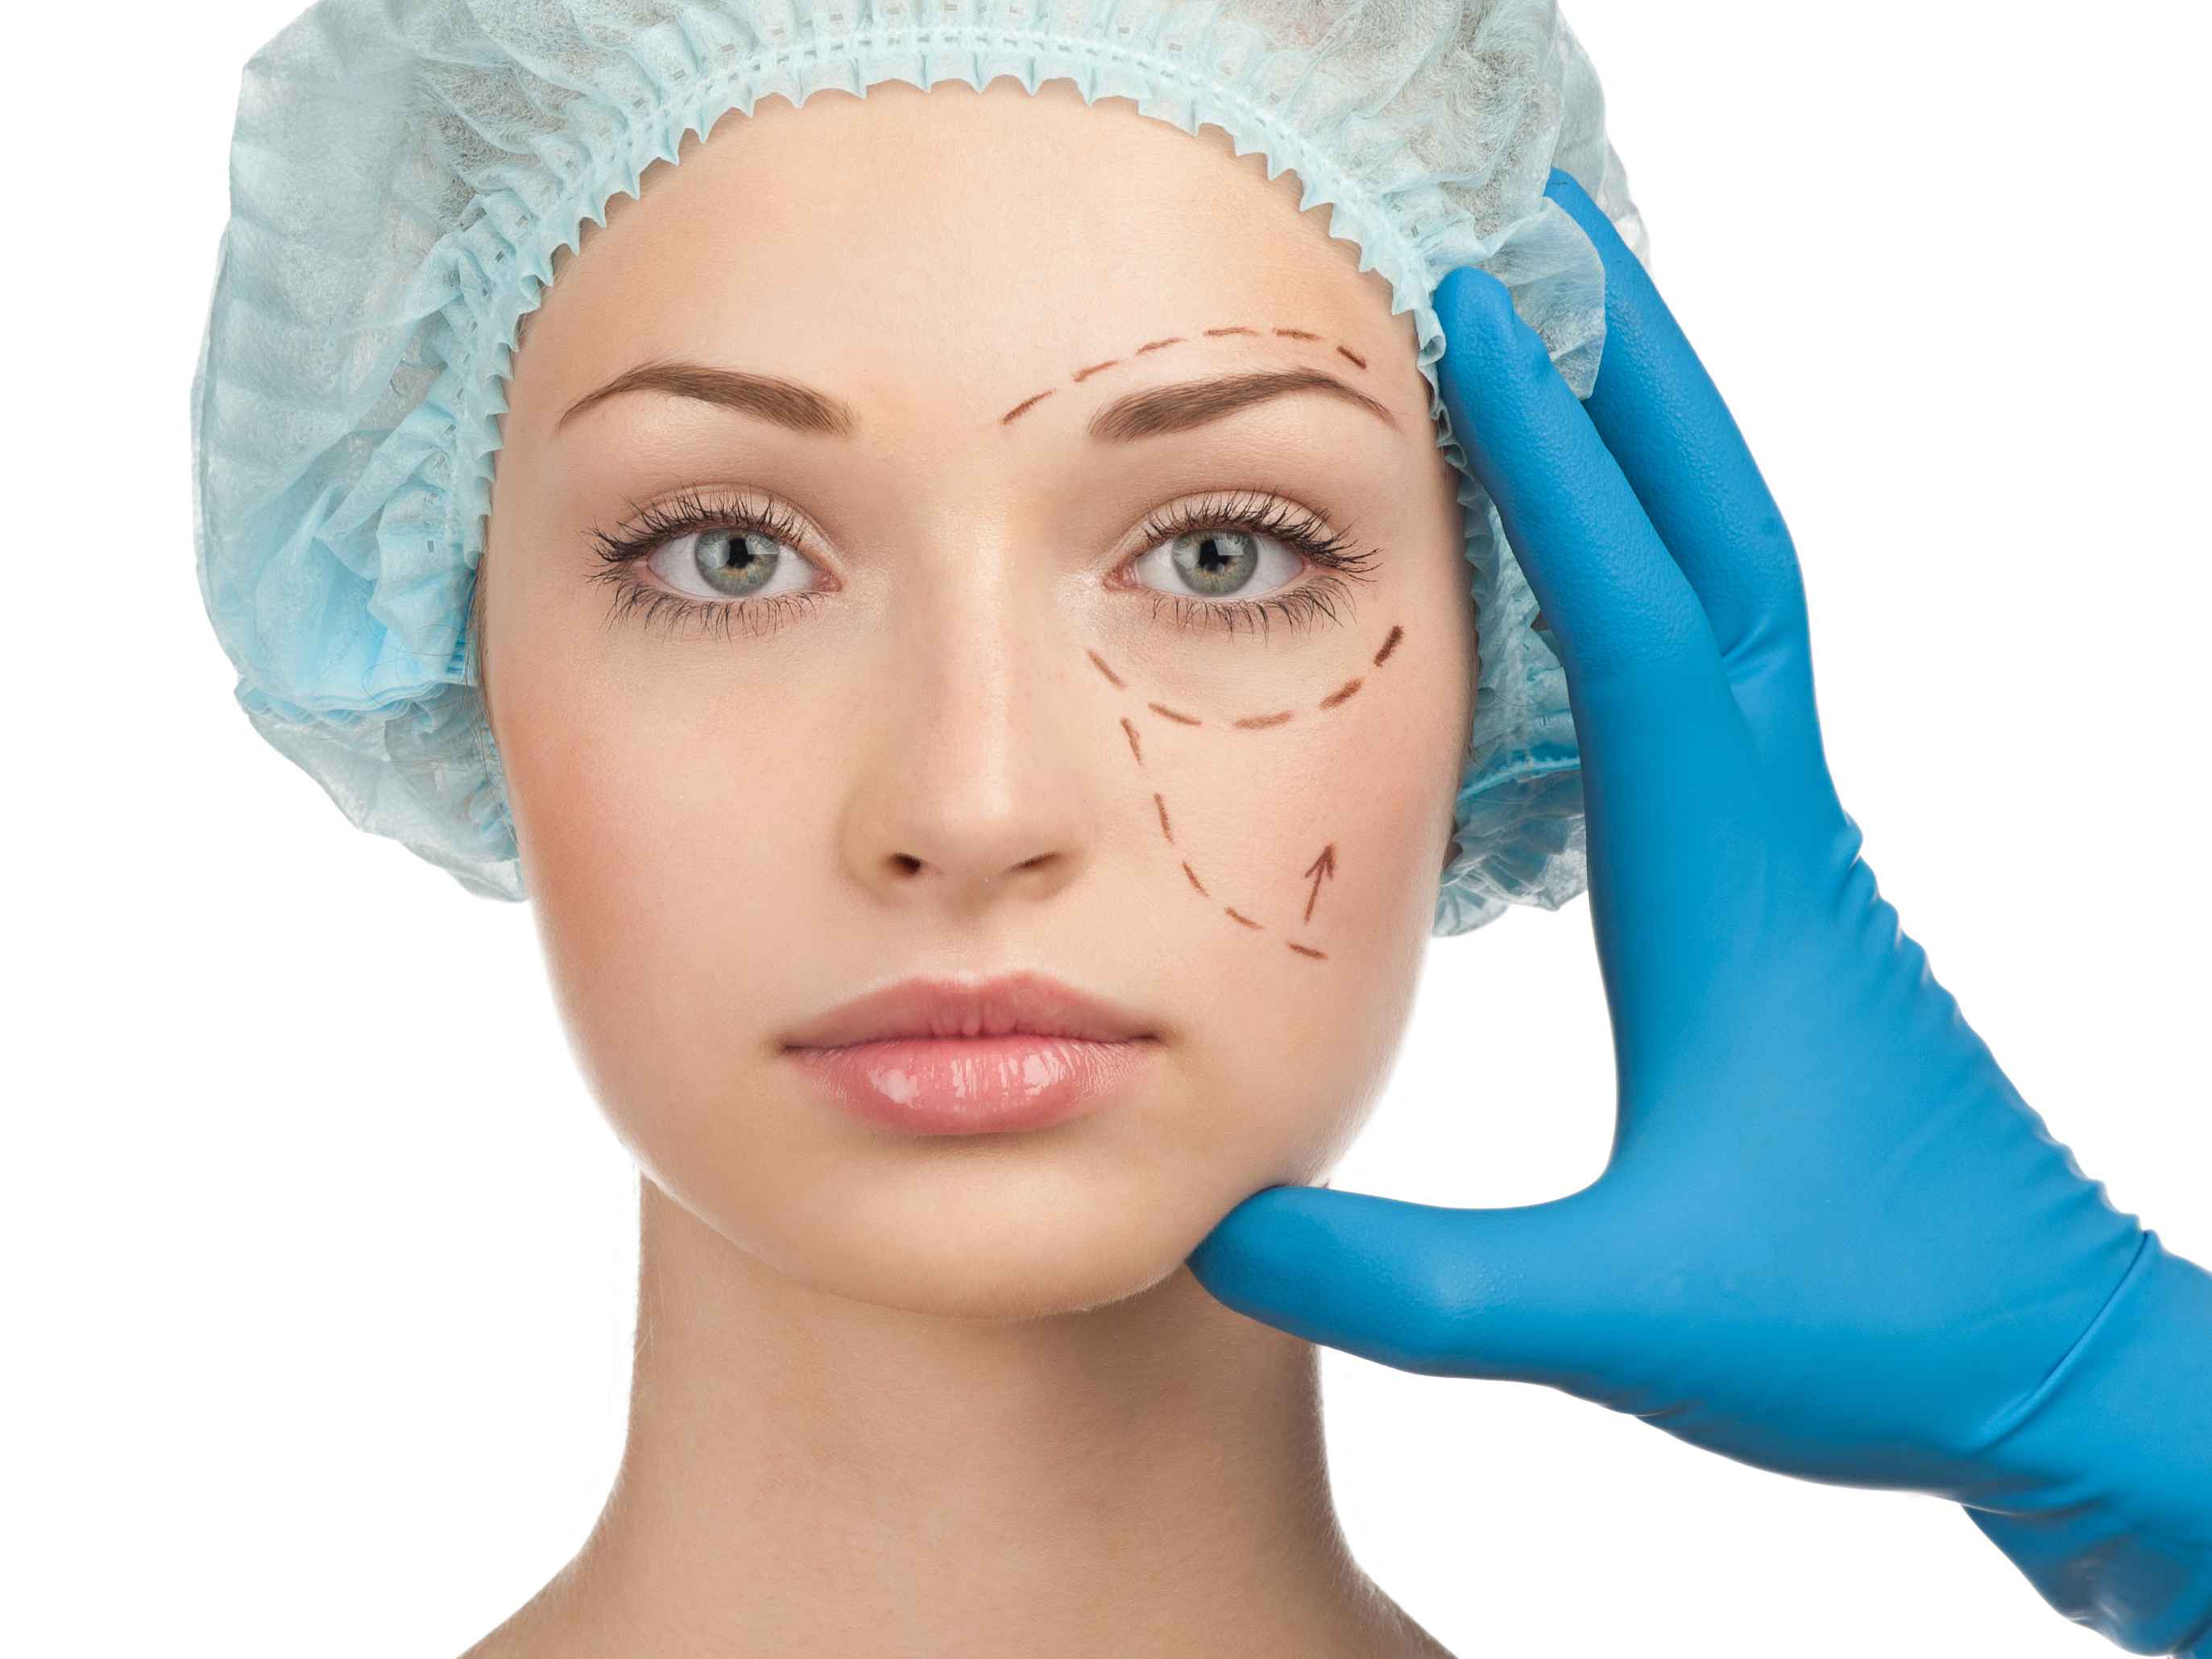 Cosmetic Surgery Image For Presentations: Plastic Surgery Picture